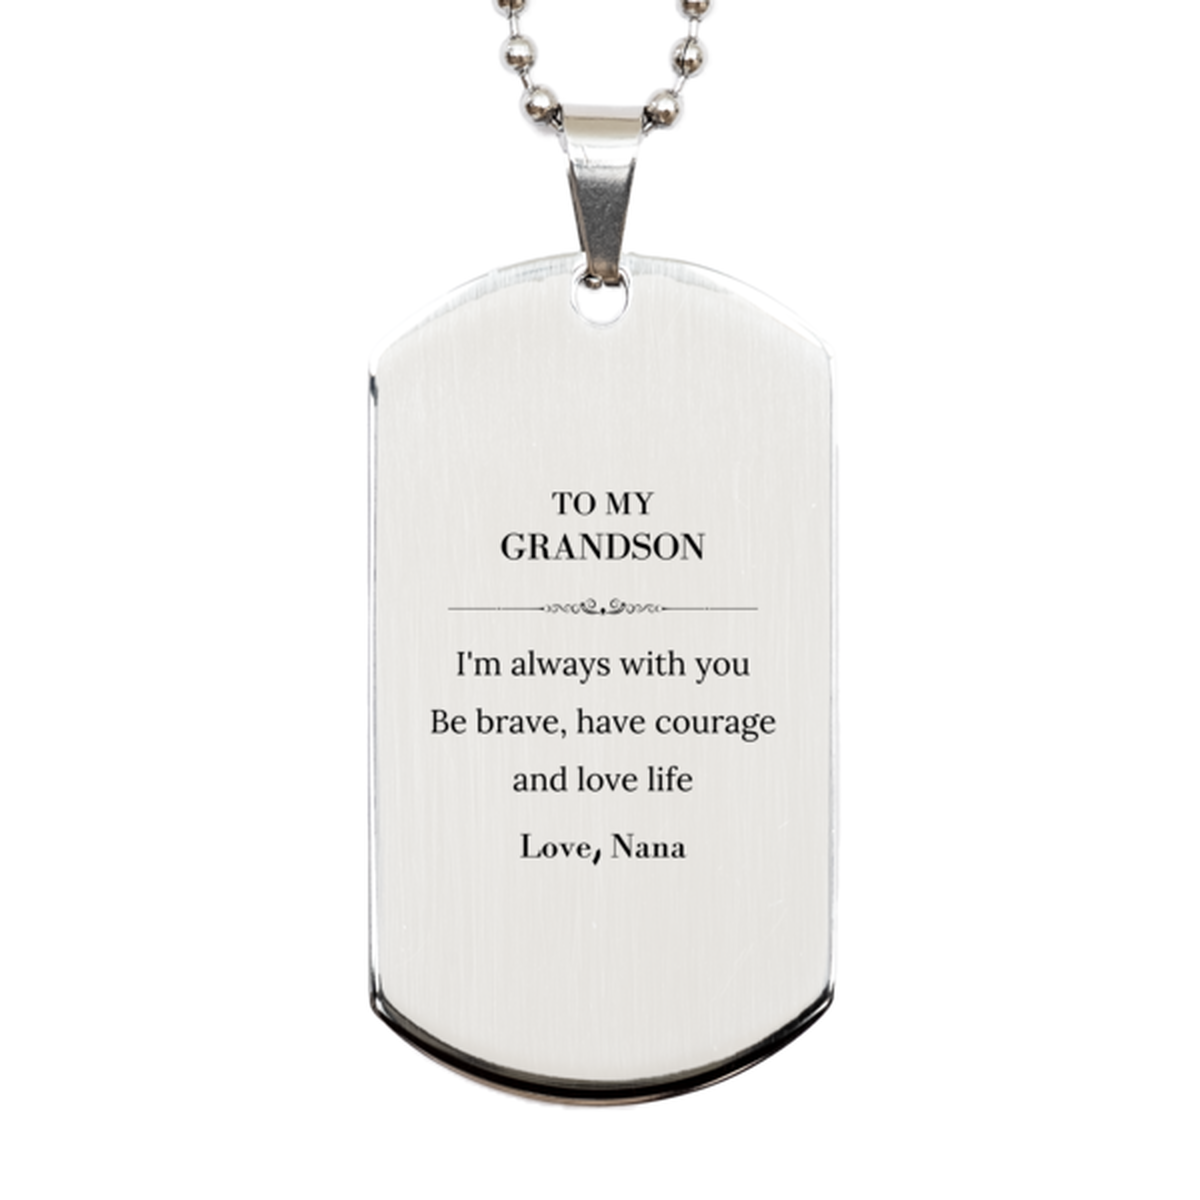 To My Grandson Gifts from Nana, Unique Silver Dog Tag Inspirational Christmas Birthday Graduation Gifts for Grandson I'm always with you. Be brave, have courage and love life. Love, Nana